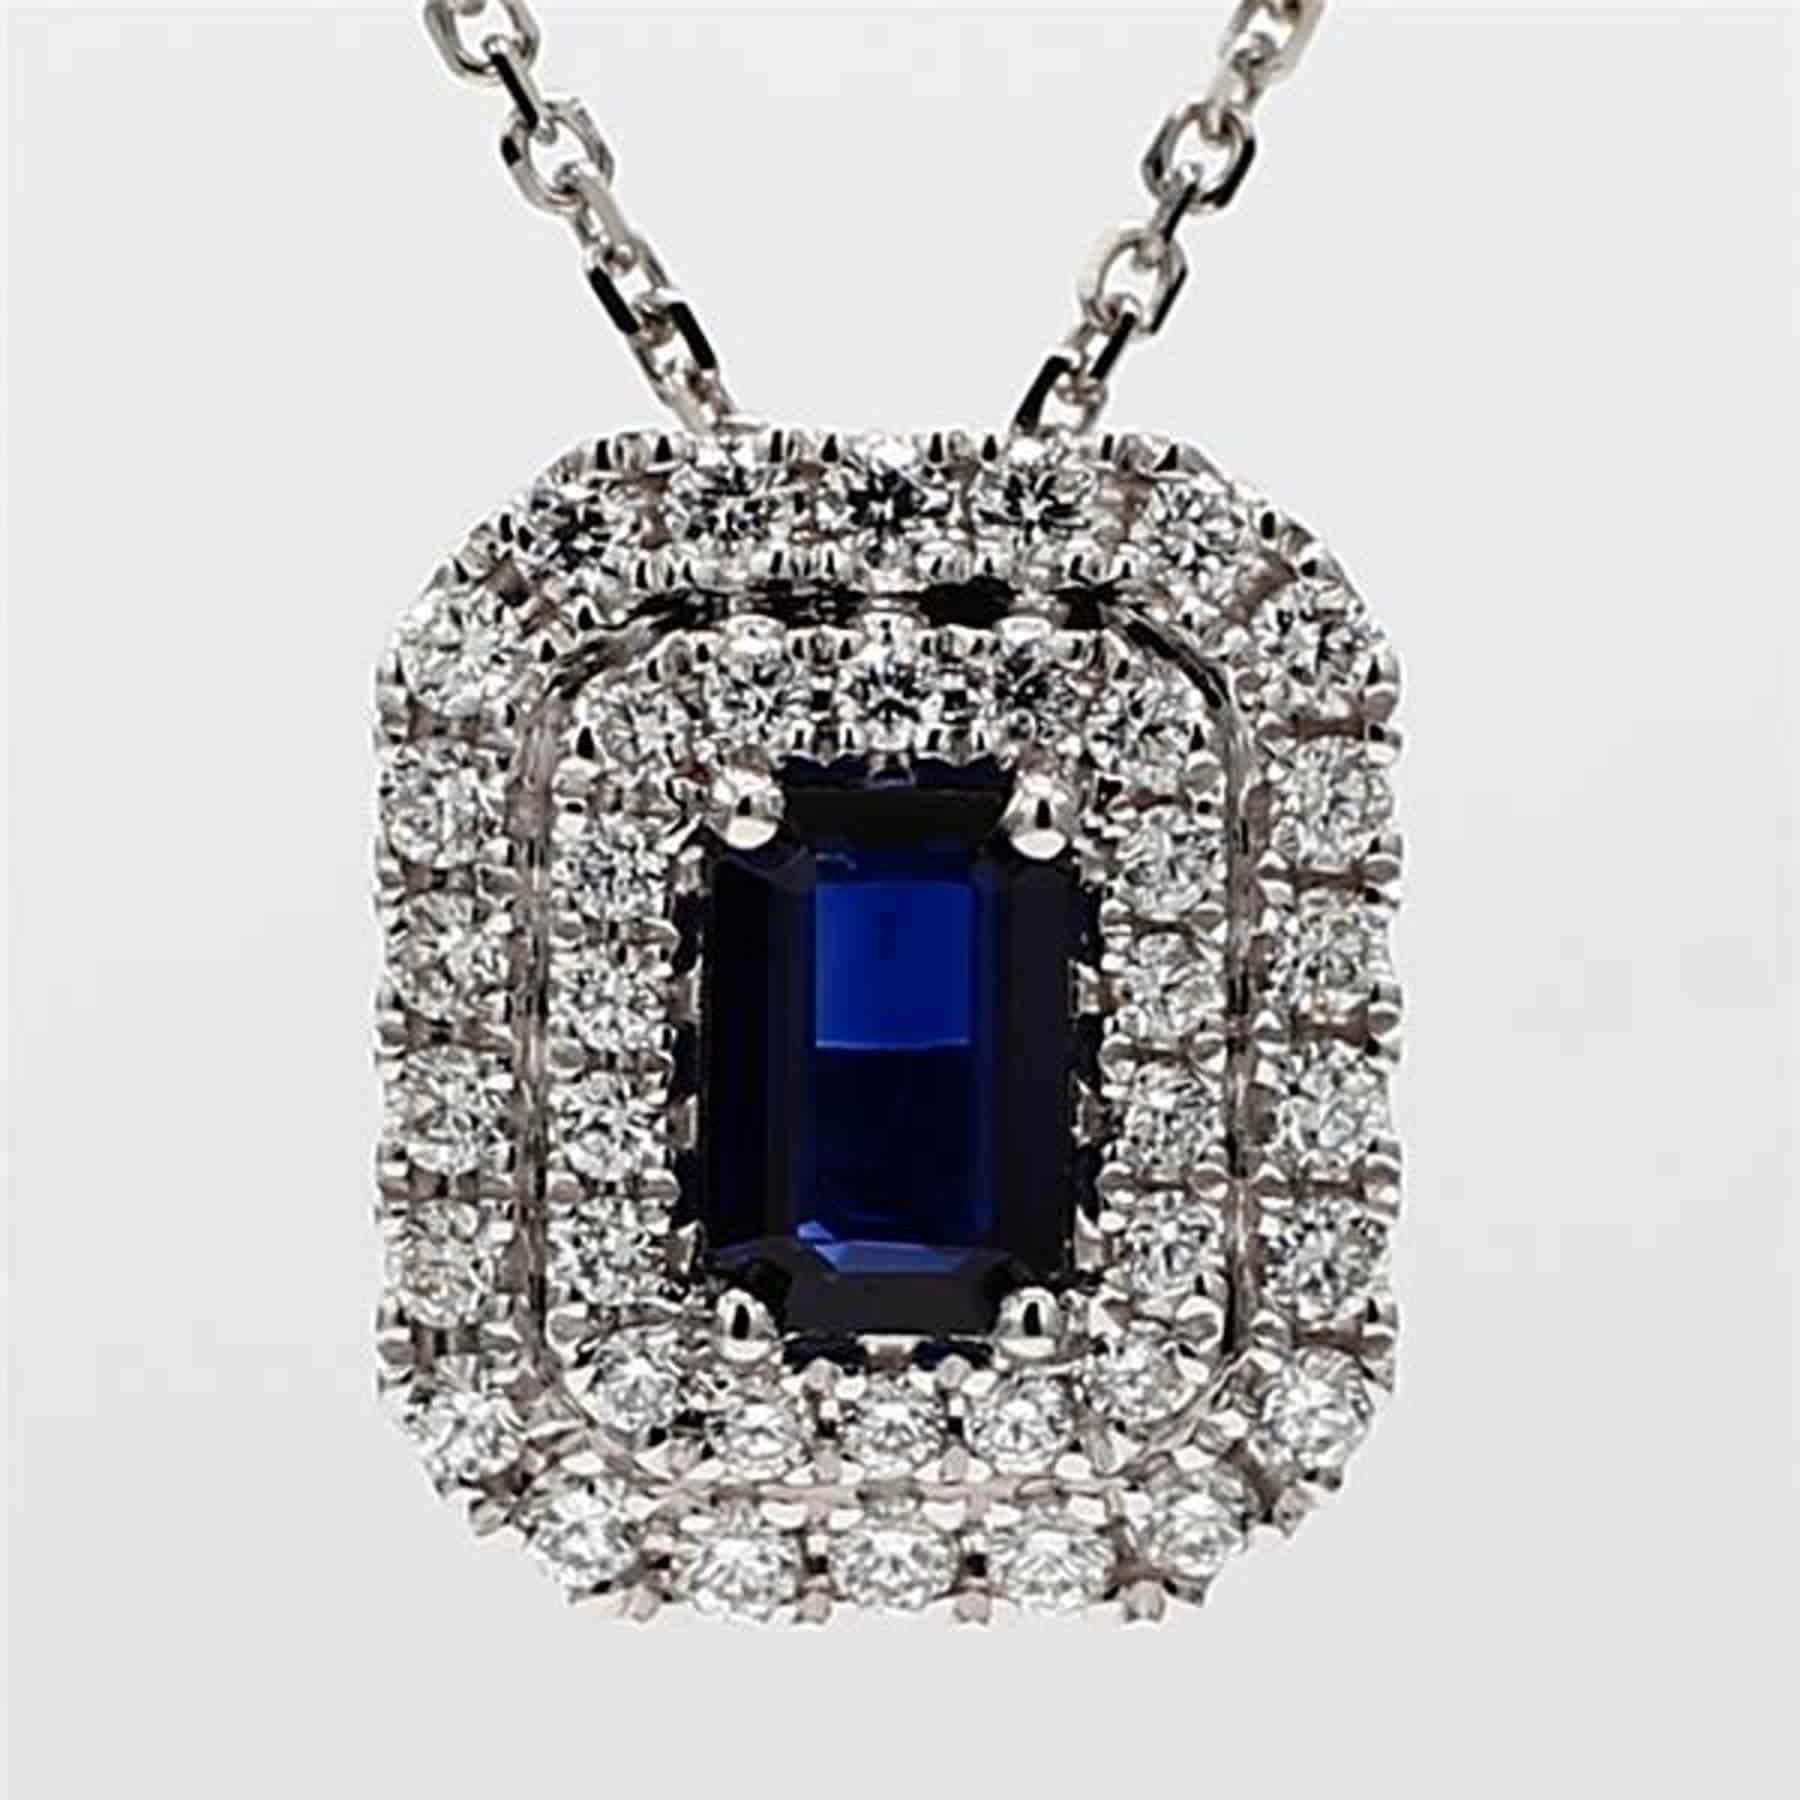 RareGemWorld's classic sapphire pendant. Mounted in a beautiful 18K White Gold setting with a natural emerald cut blue sapphire. The sapphire is surrounded by natural round white diamond melee. This pendant is guaranteed to impress and enhance your